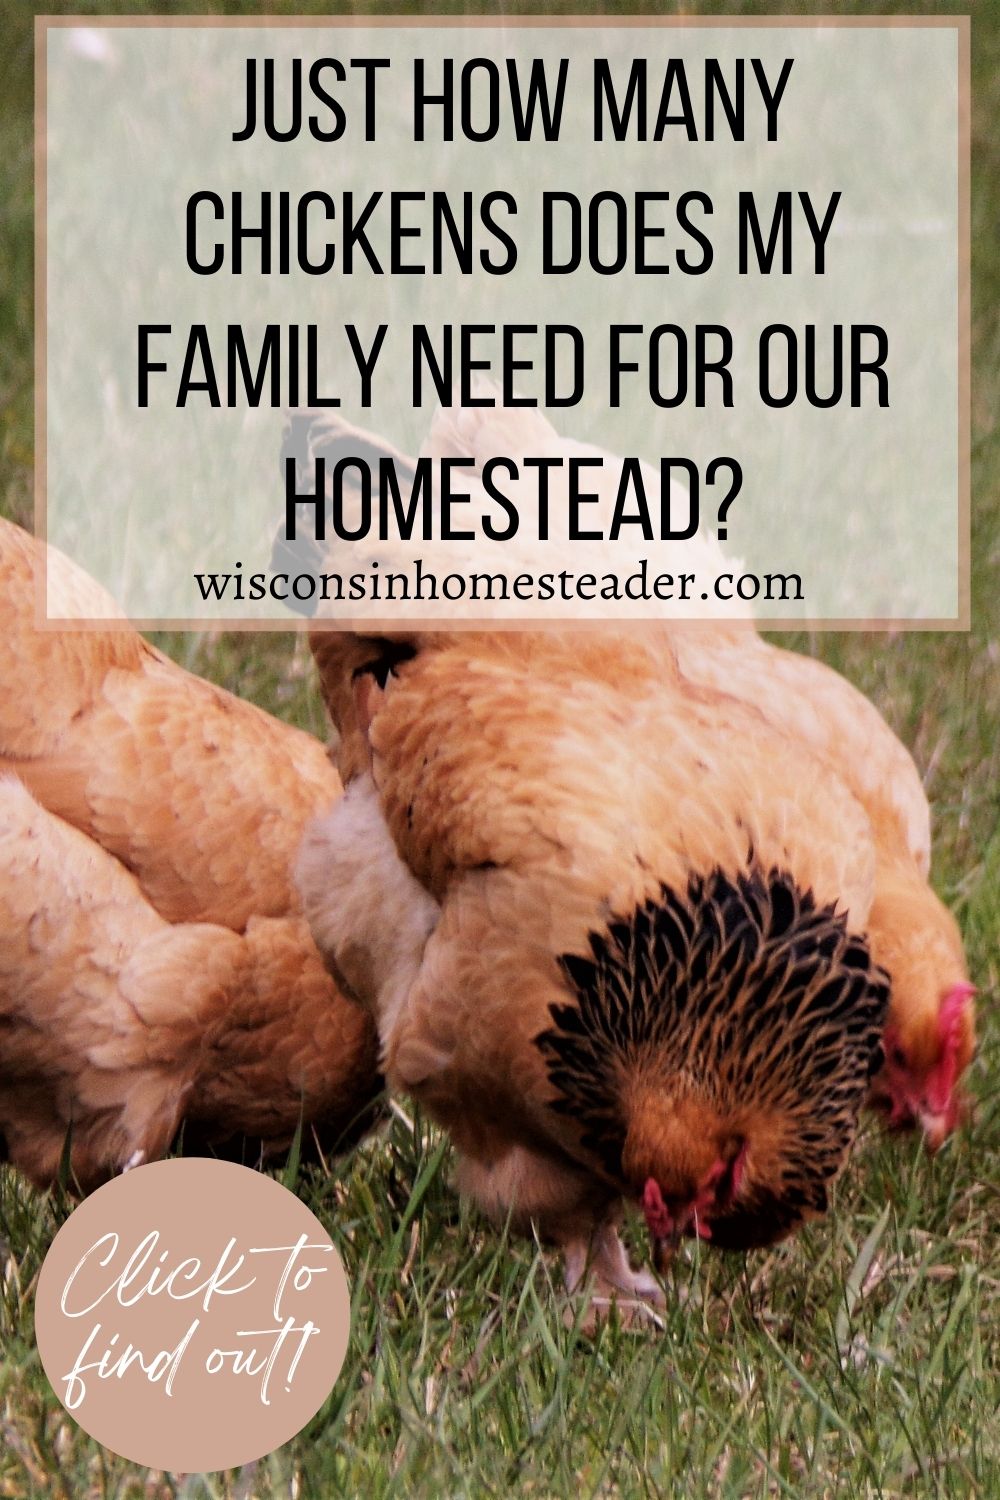 how many chickens does my family need for our homestead?